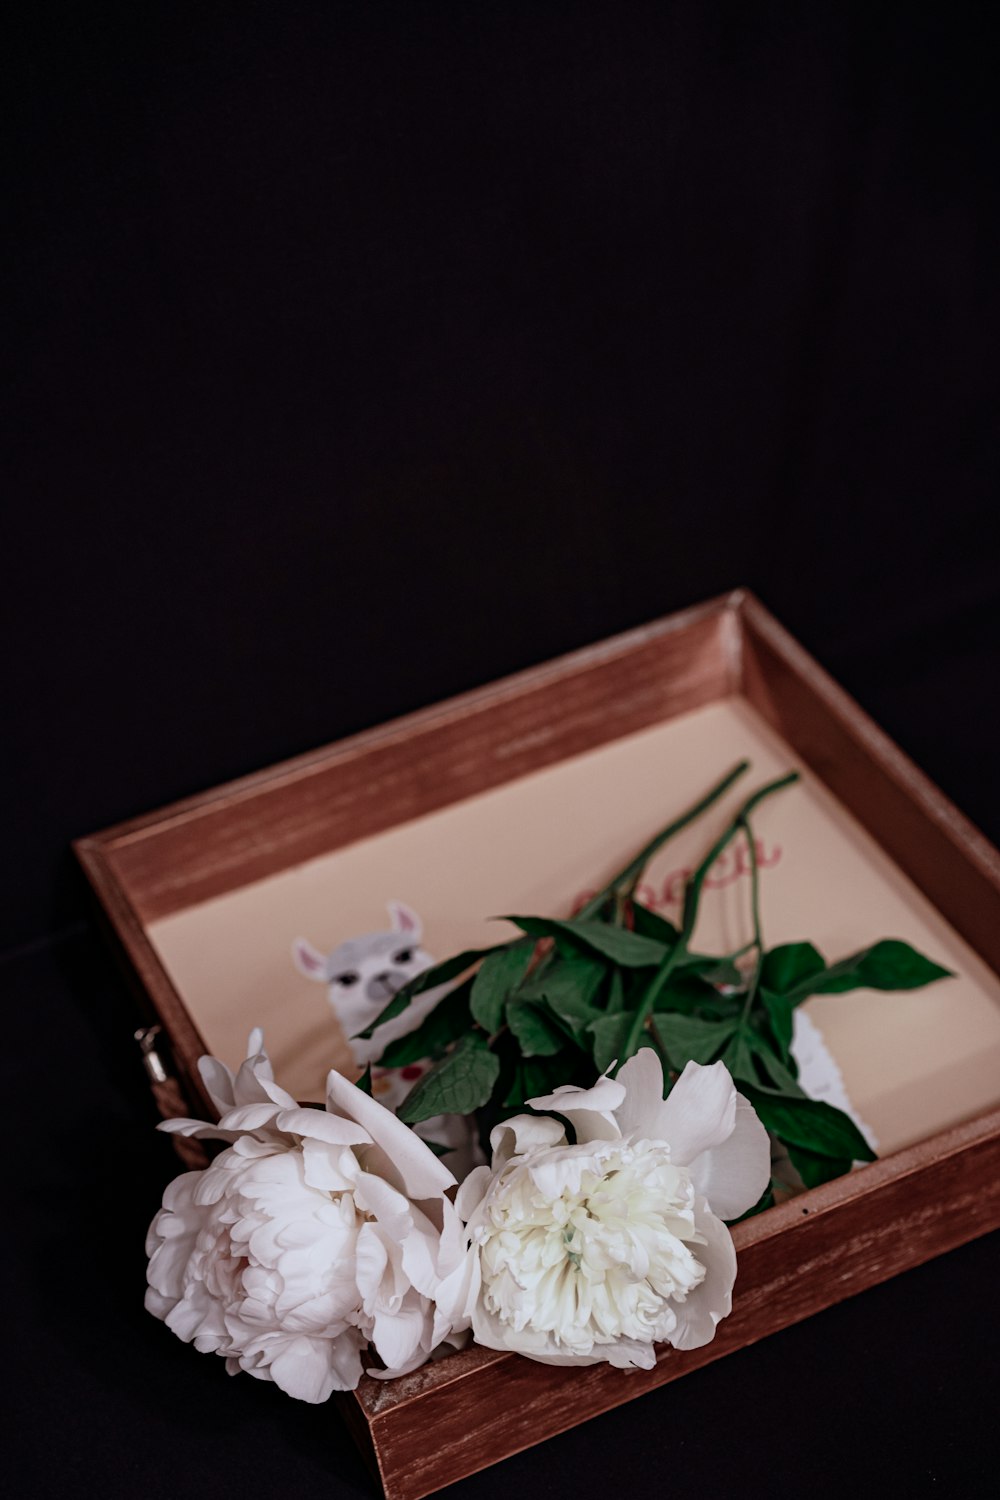 white flowers on brown wooden tray